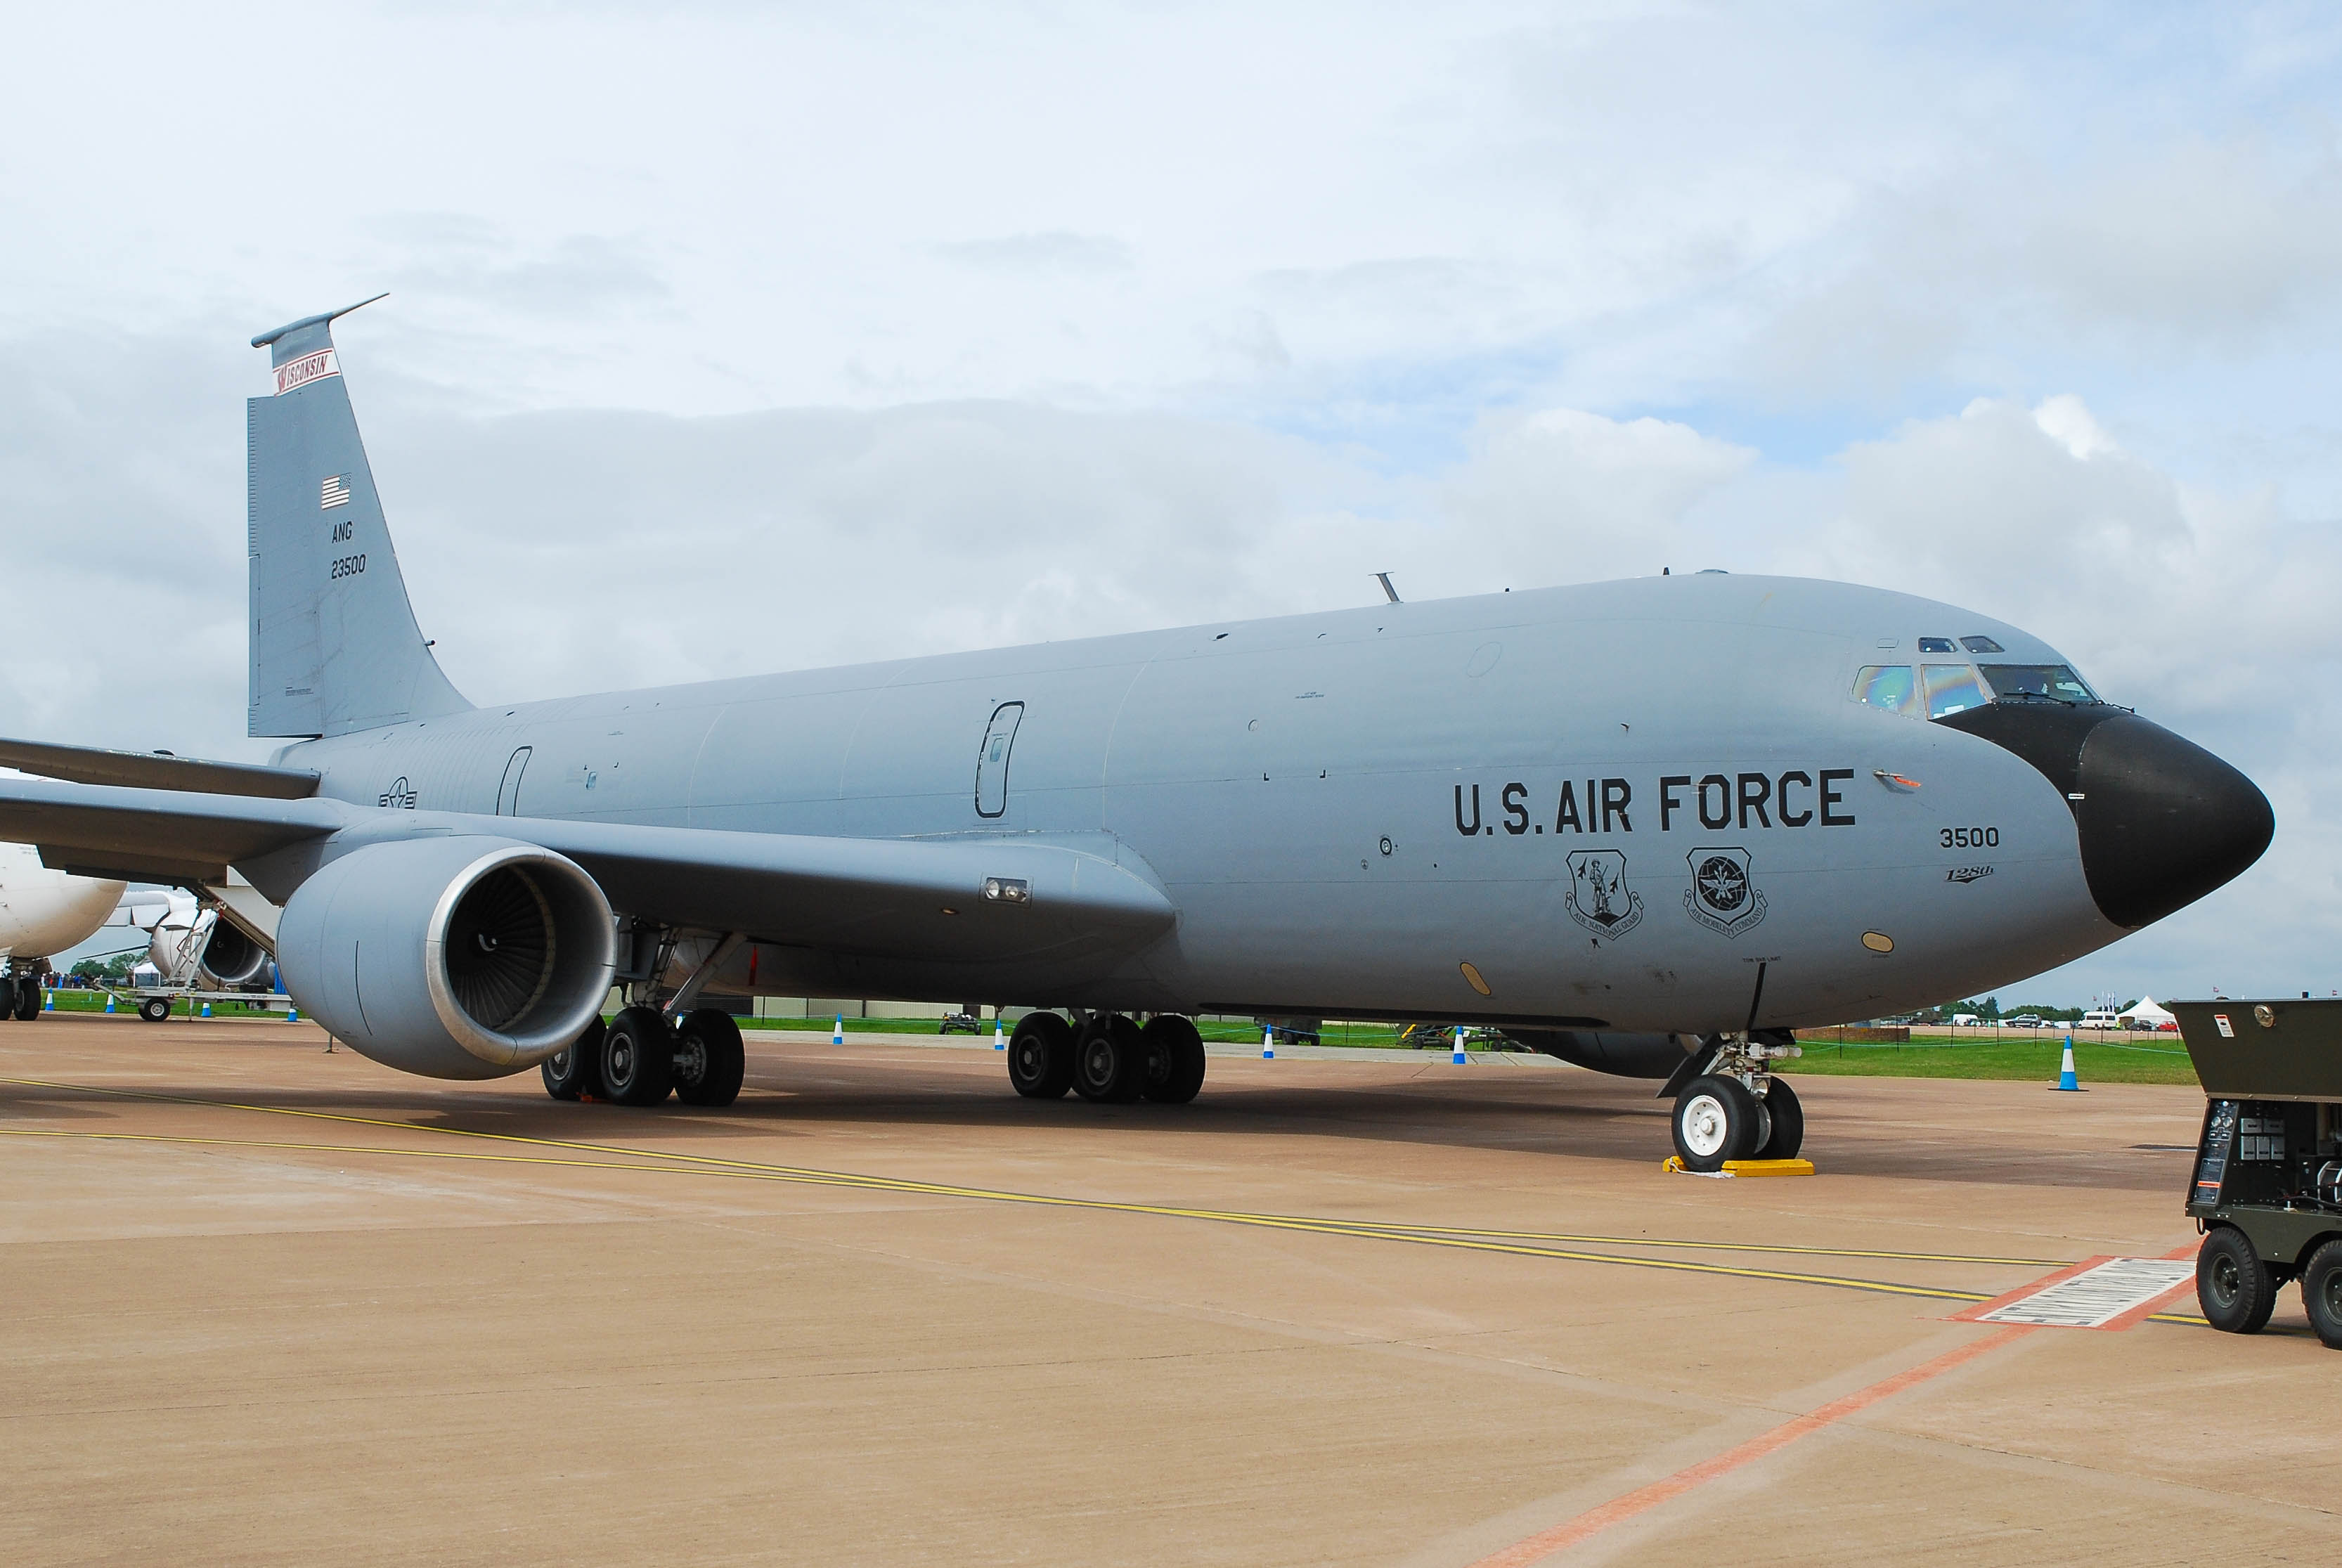 62-3500/623500 USAF - United States Air Force Boeing KC-135R Stratotanker Photo by colinw - AVSpotters.com